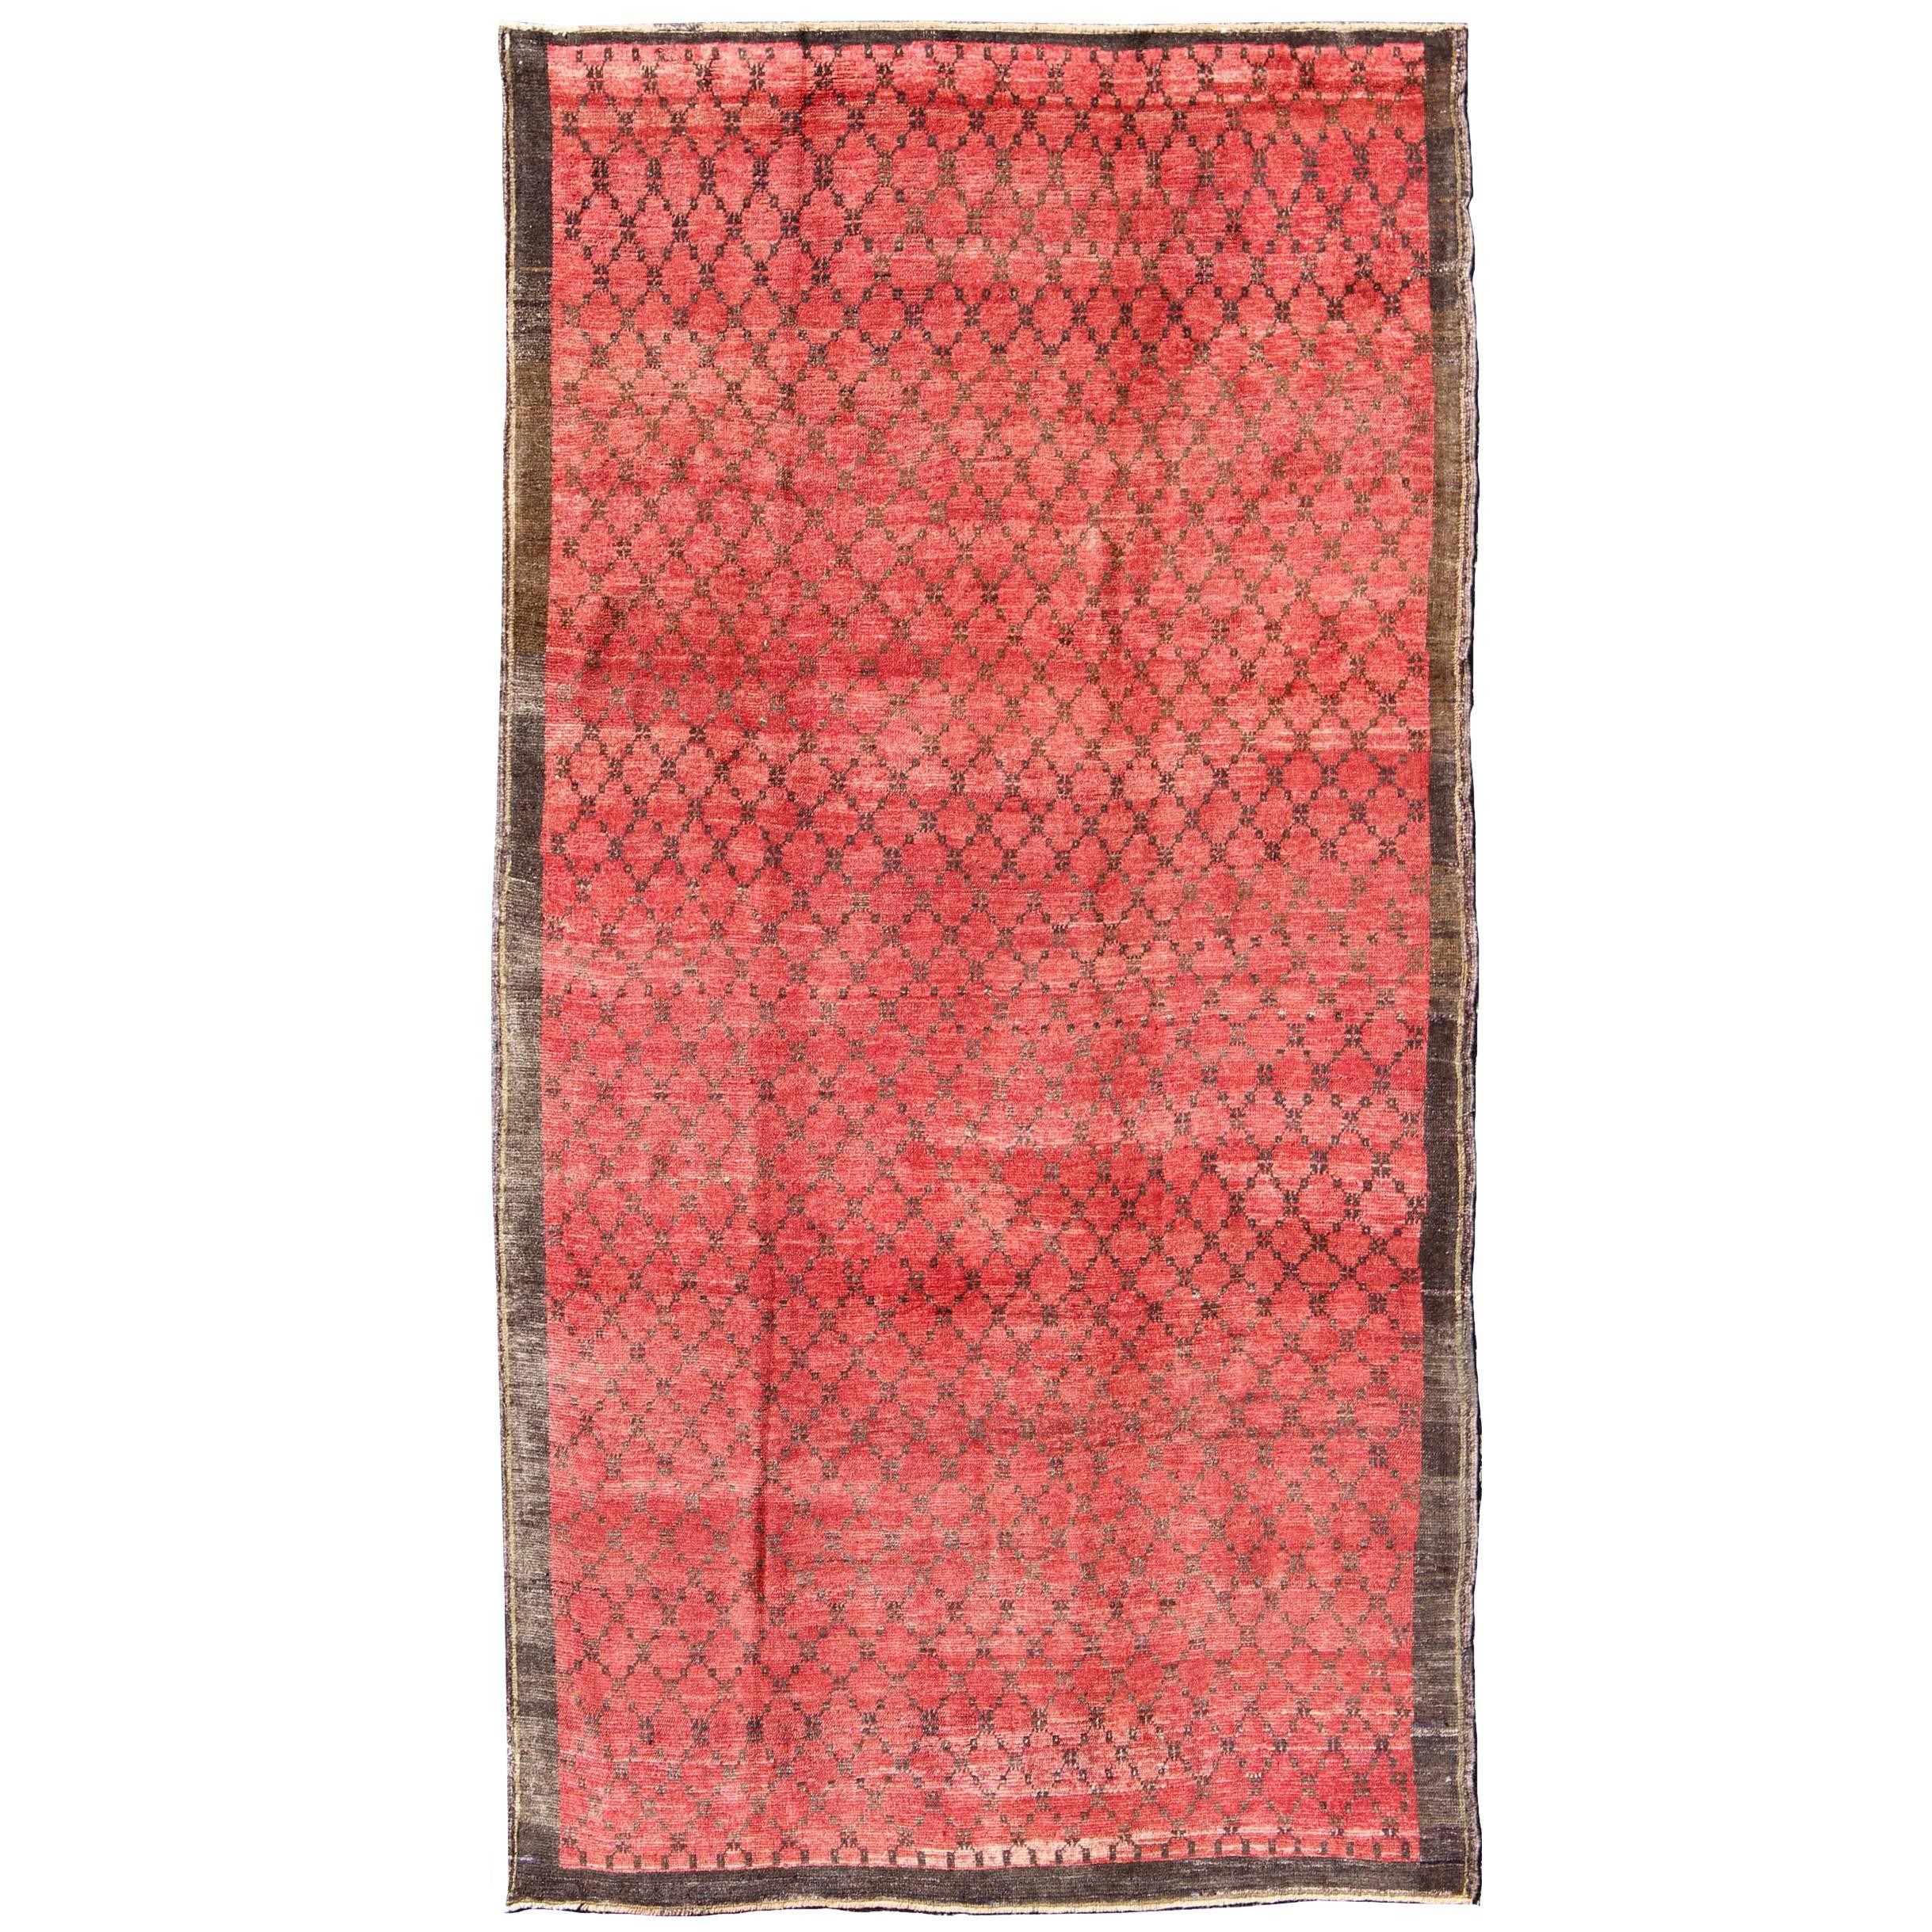 Turkish Konya Rug with a Modern Design in Red and Brown 